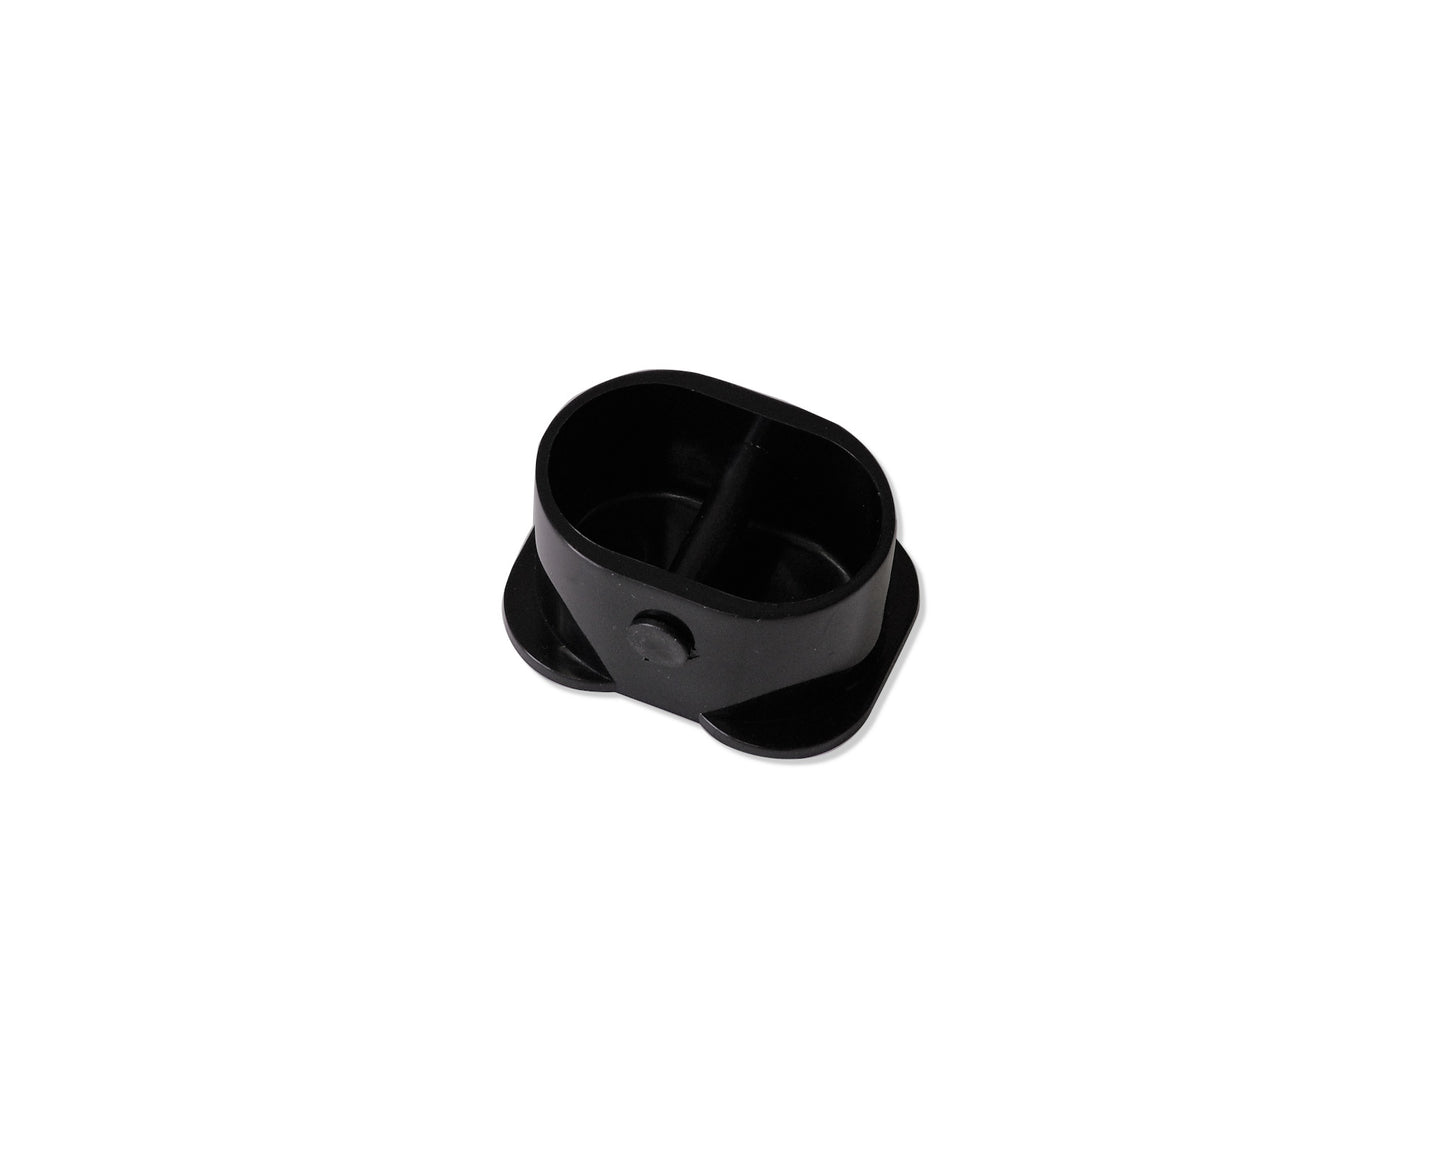 Afras Cup Anchor Reinforced Black ABS